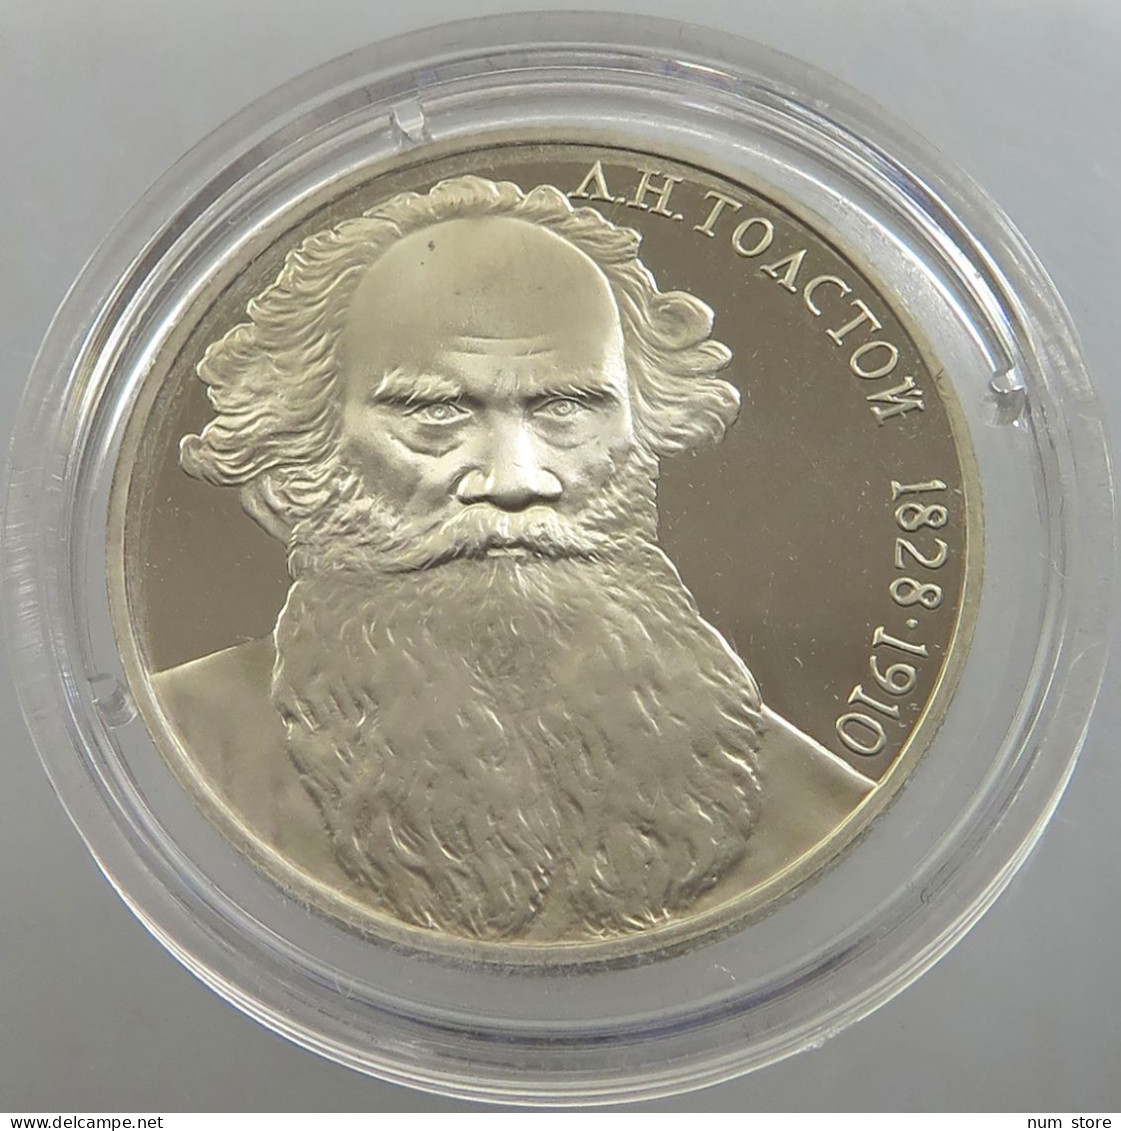 RUSSIA USSR 1 ROUBLE 1988 TOLSTOI PROOF #sm14 0481 - Russland